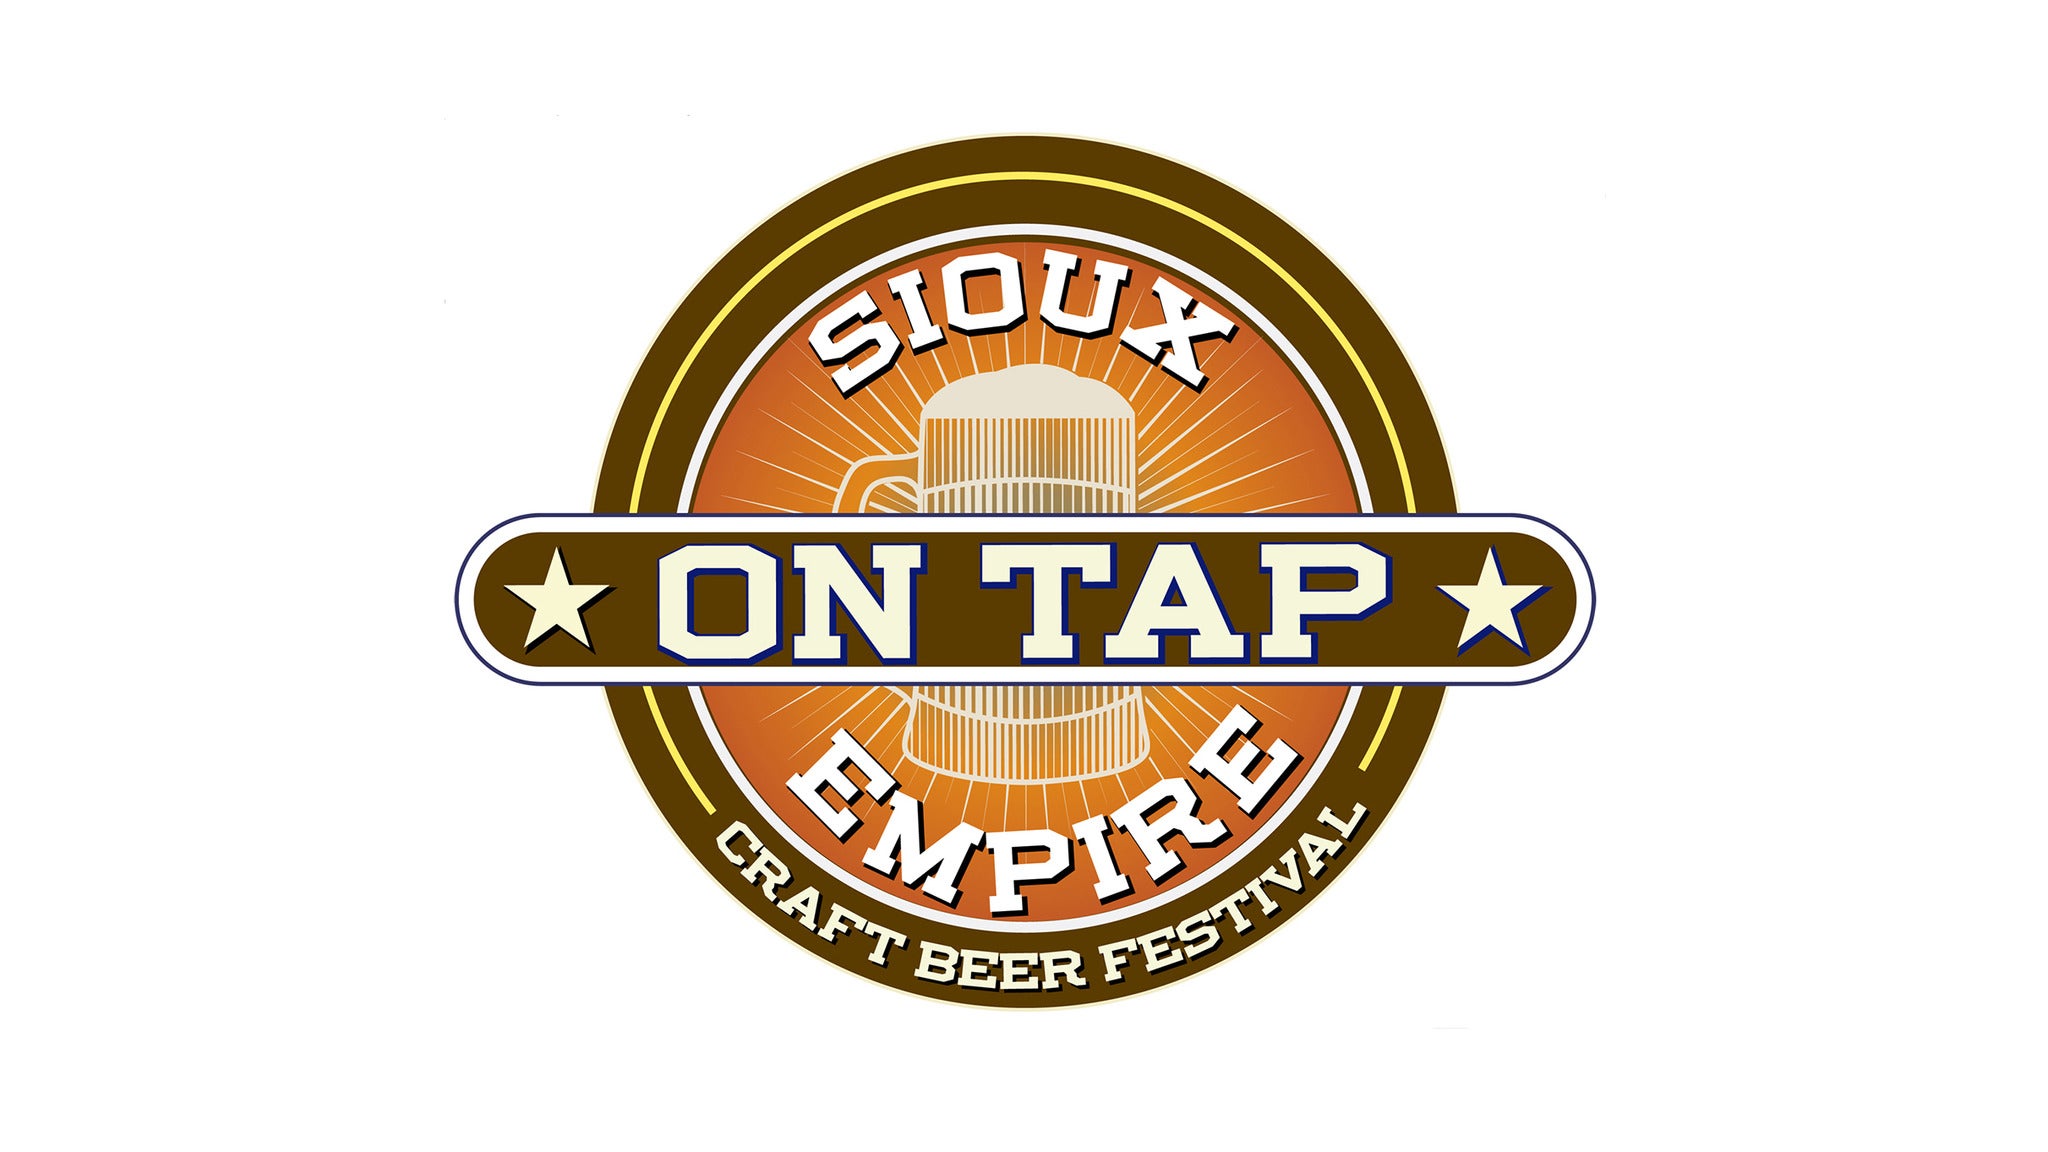 Sioux Empire On Tap in Sioux Falls promo photo for The Gift of Beer presale offer code